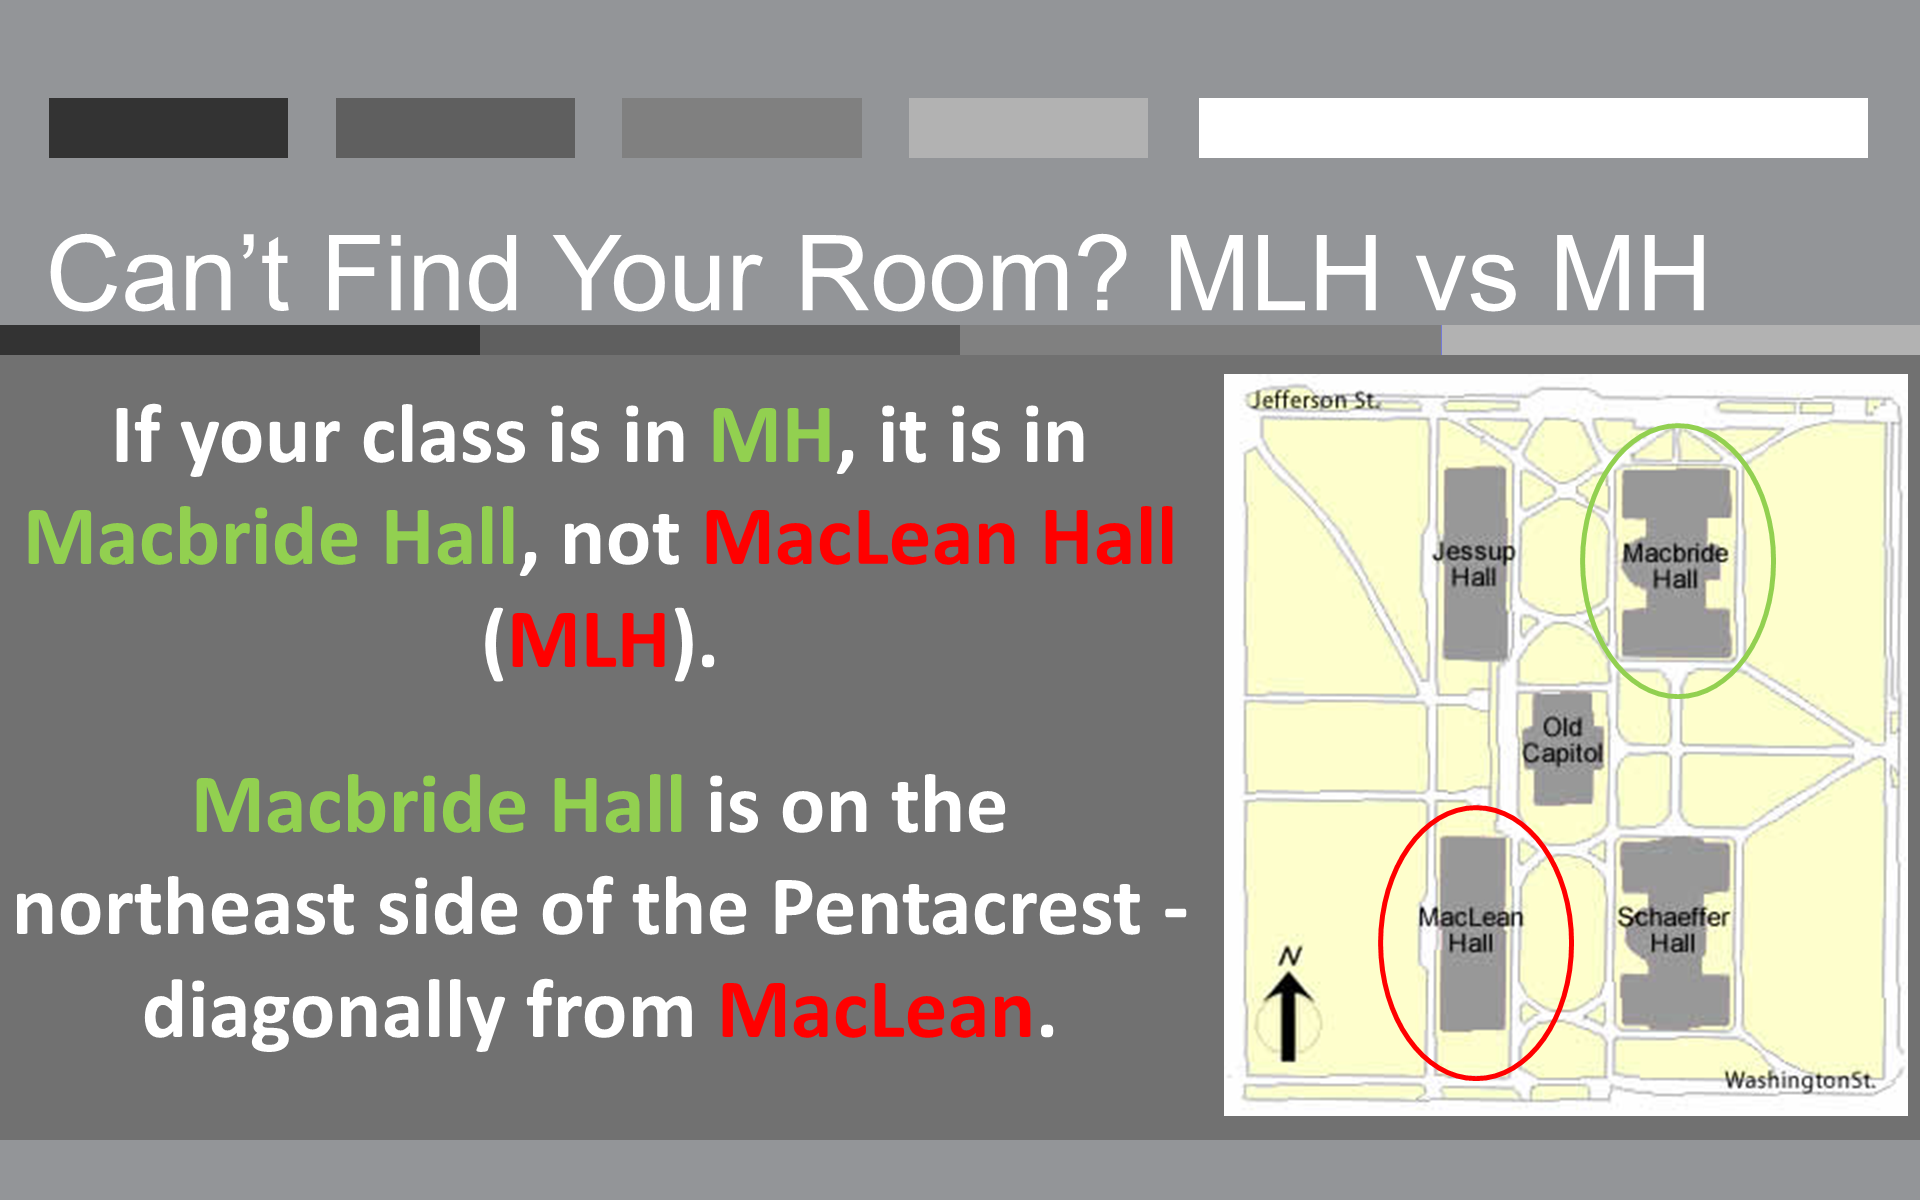 Can’t Find Your Room? MLH vs MH - If your class is in MH, it is in Macbride Hall, not MacLean Hall (MLH).   Macbride Hall is on the northeast side of the Pentacrest - diagonally from MacLean.